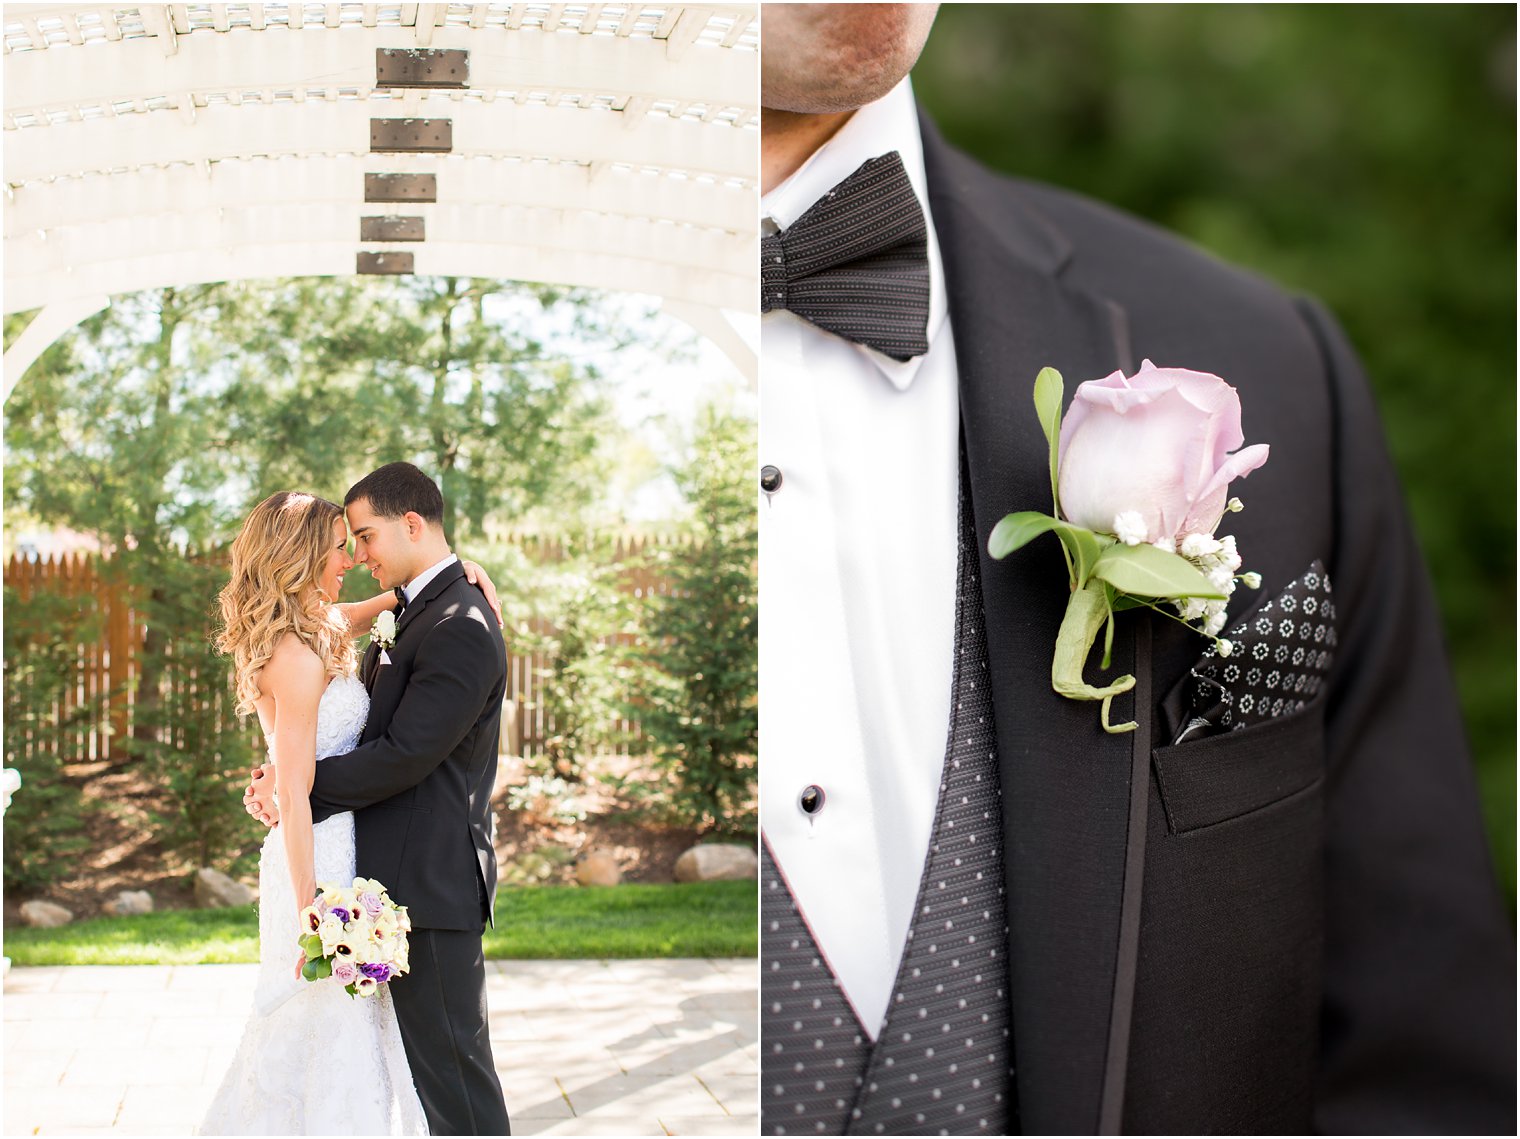 Purple boutonniere by Flowers by Connie | Photos by Idalia Photography